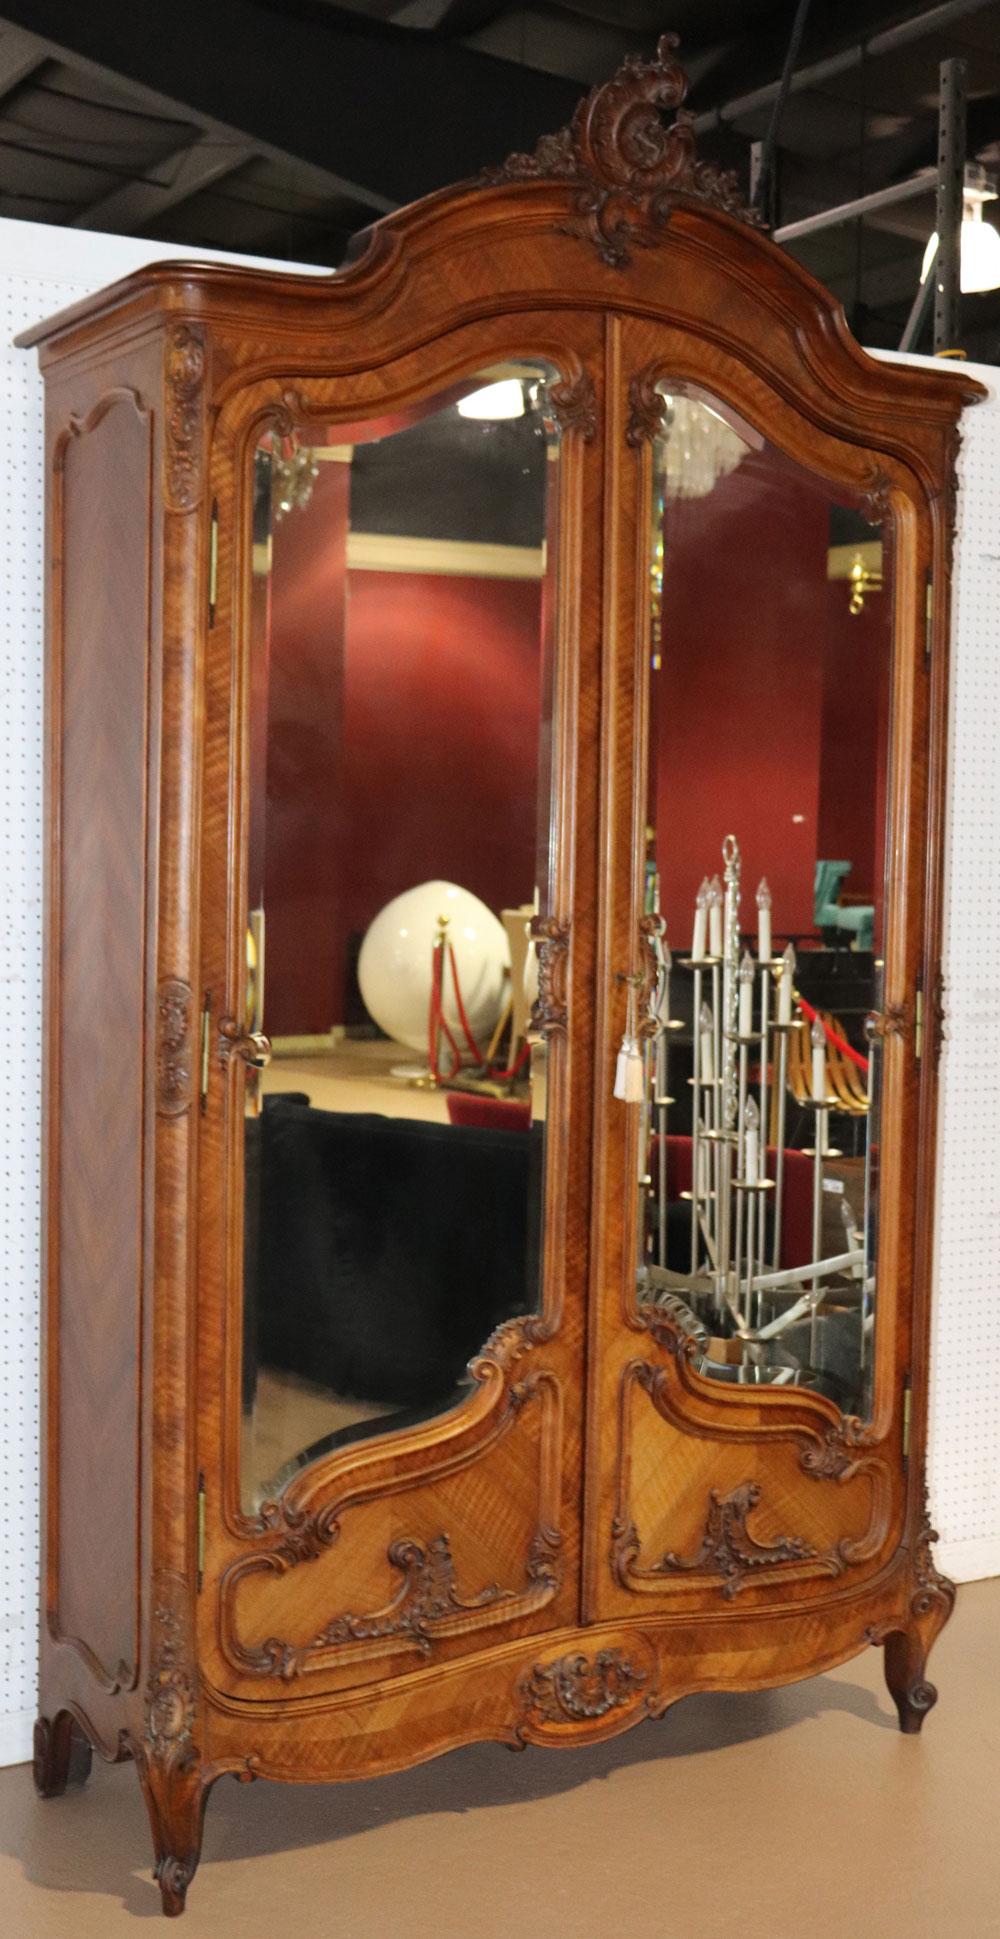 This is a gorgeous antique French armoire. The armoire has two mirrored doors and does have drawers and shelves. The mirrors are in good condition and the condition and has few flaws worthy of mentioning. The armoire measures 58 wide at the widest